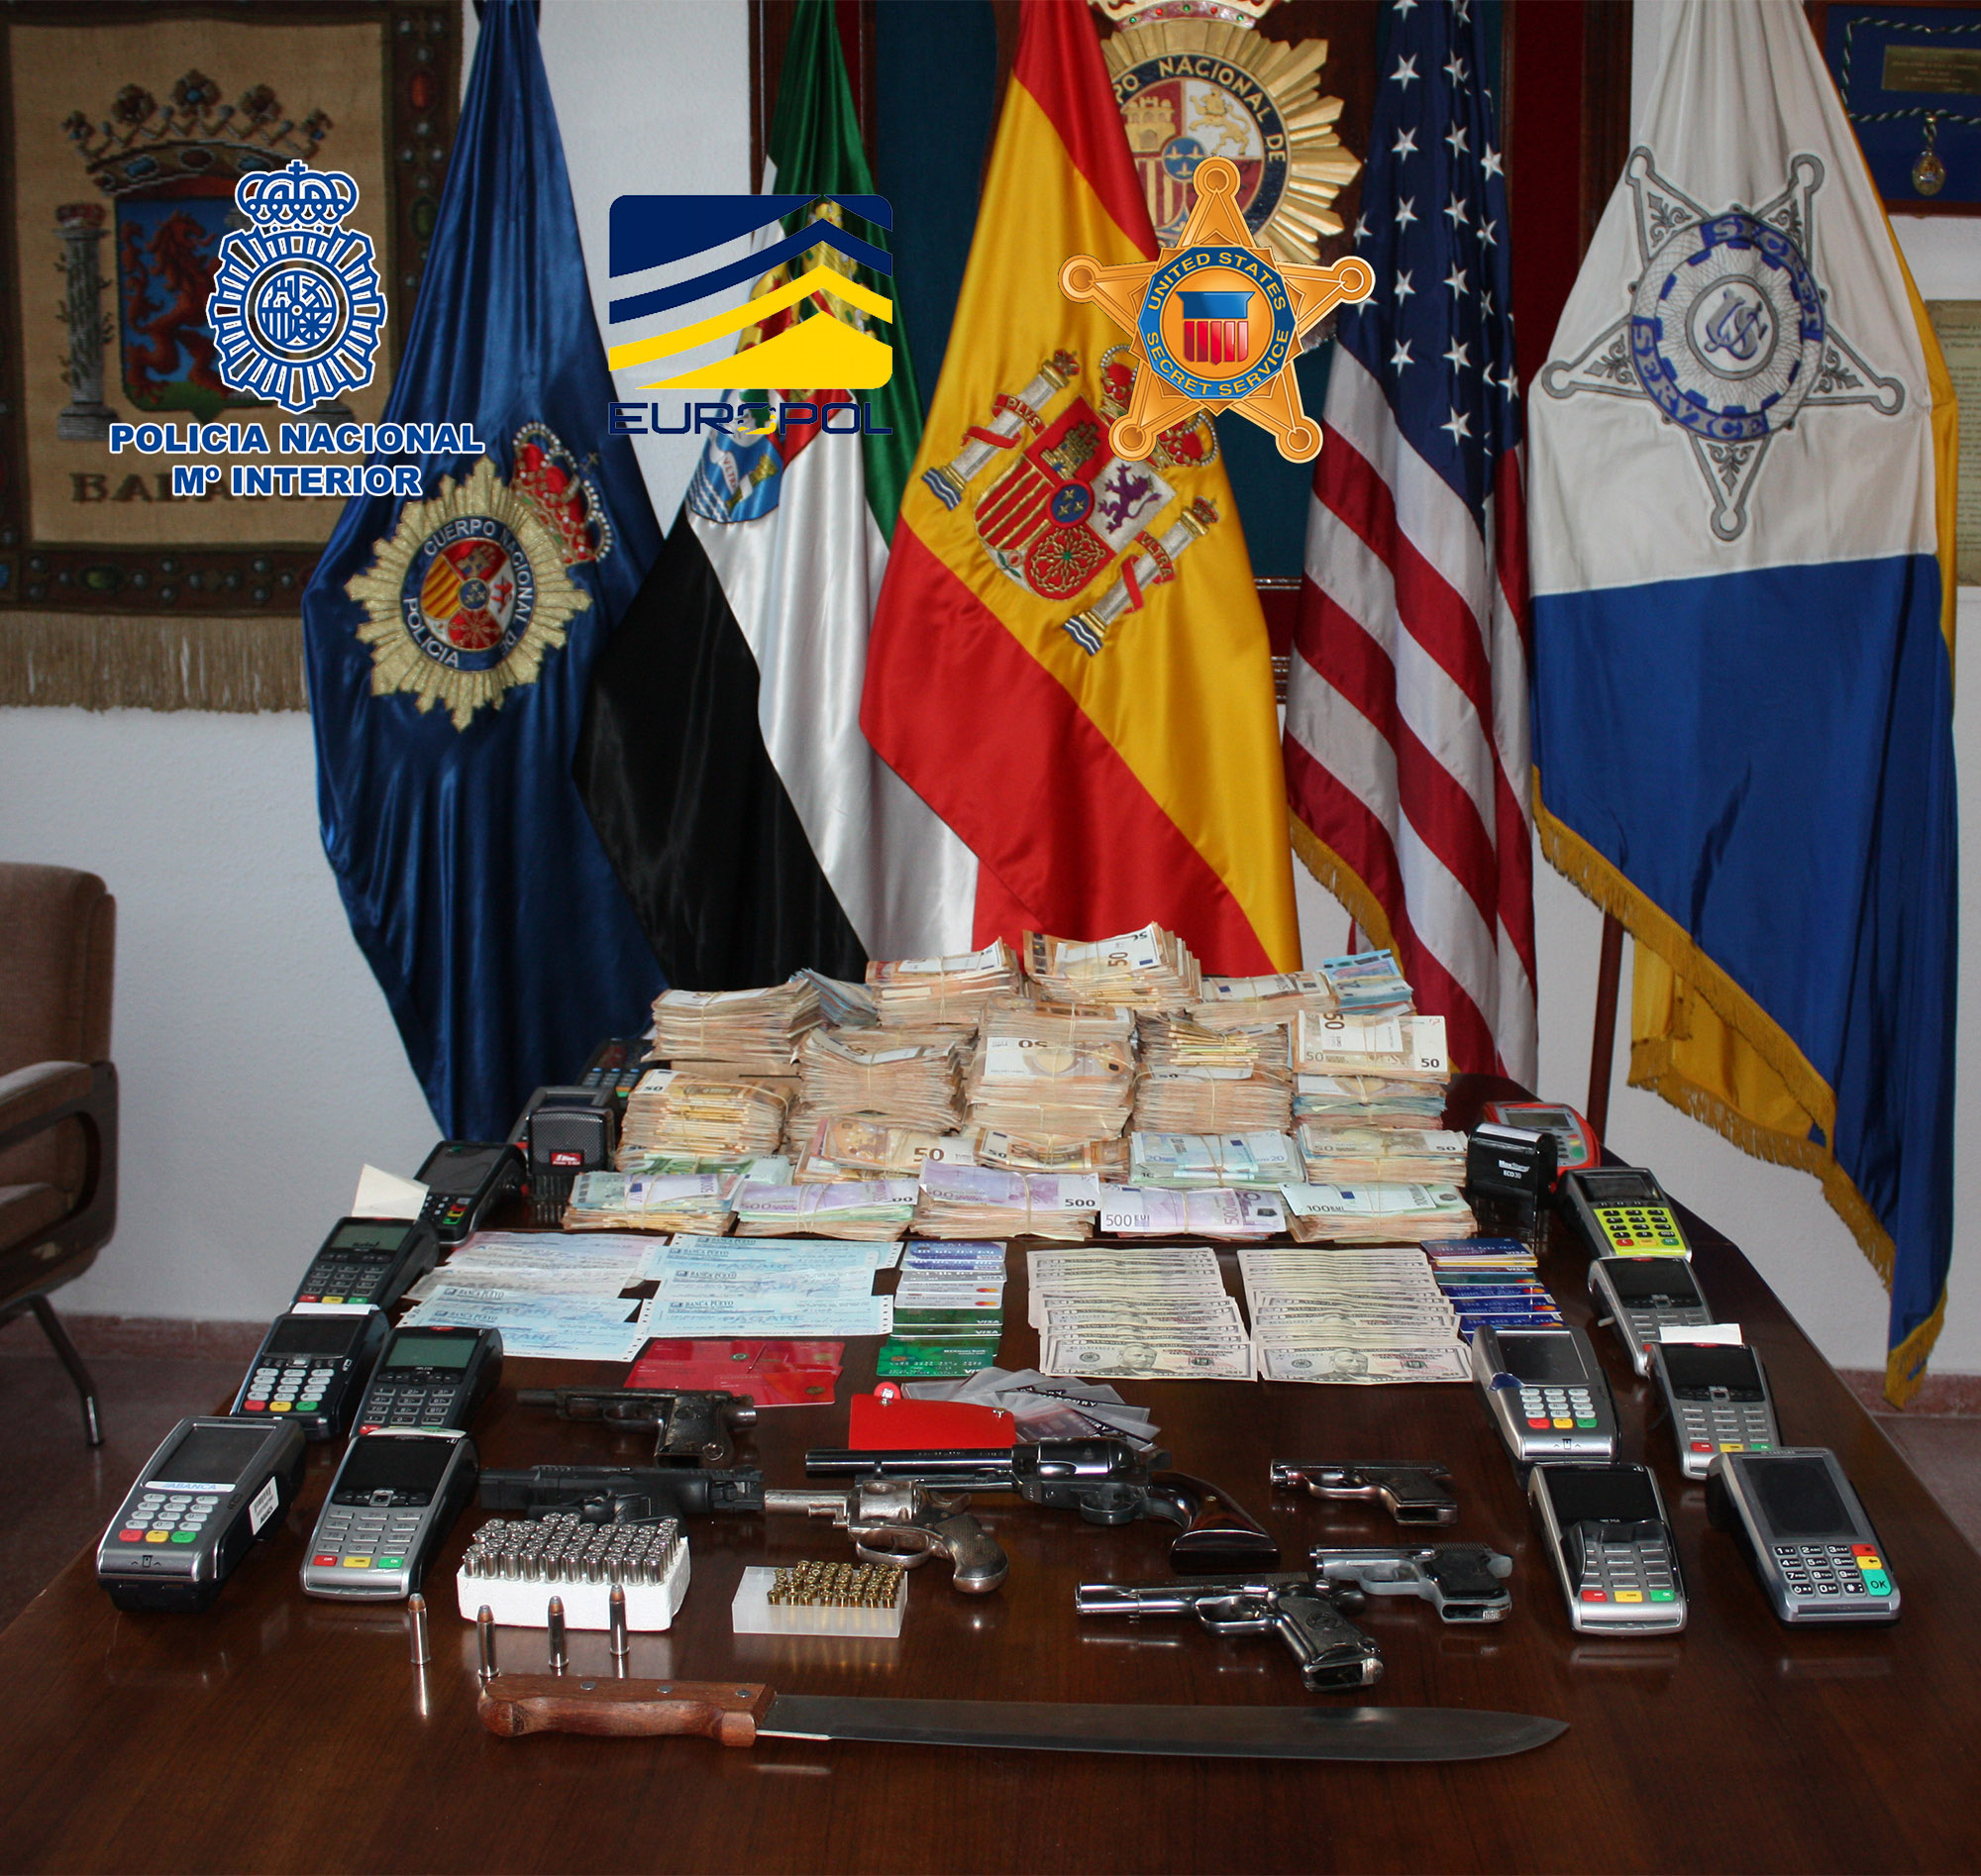 Officers also seized more than 400,000 euros in cash, 14 luxury vehicles, fake identification documents, guns and over 200 bank cards. (Source: Europol)